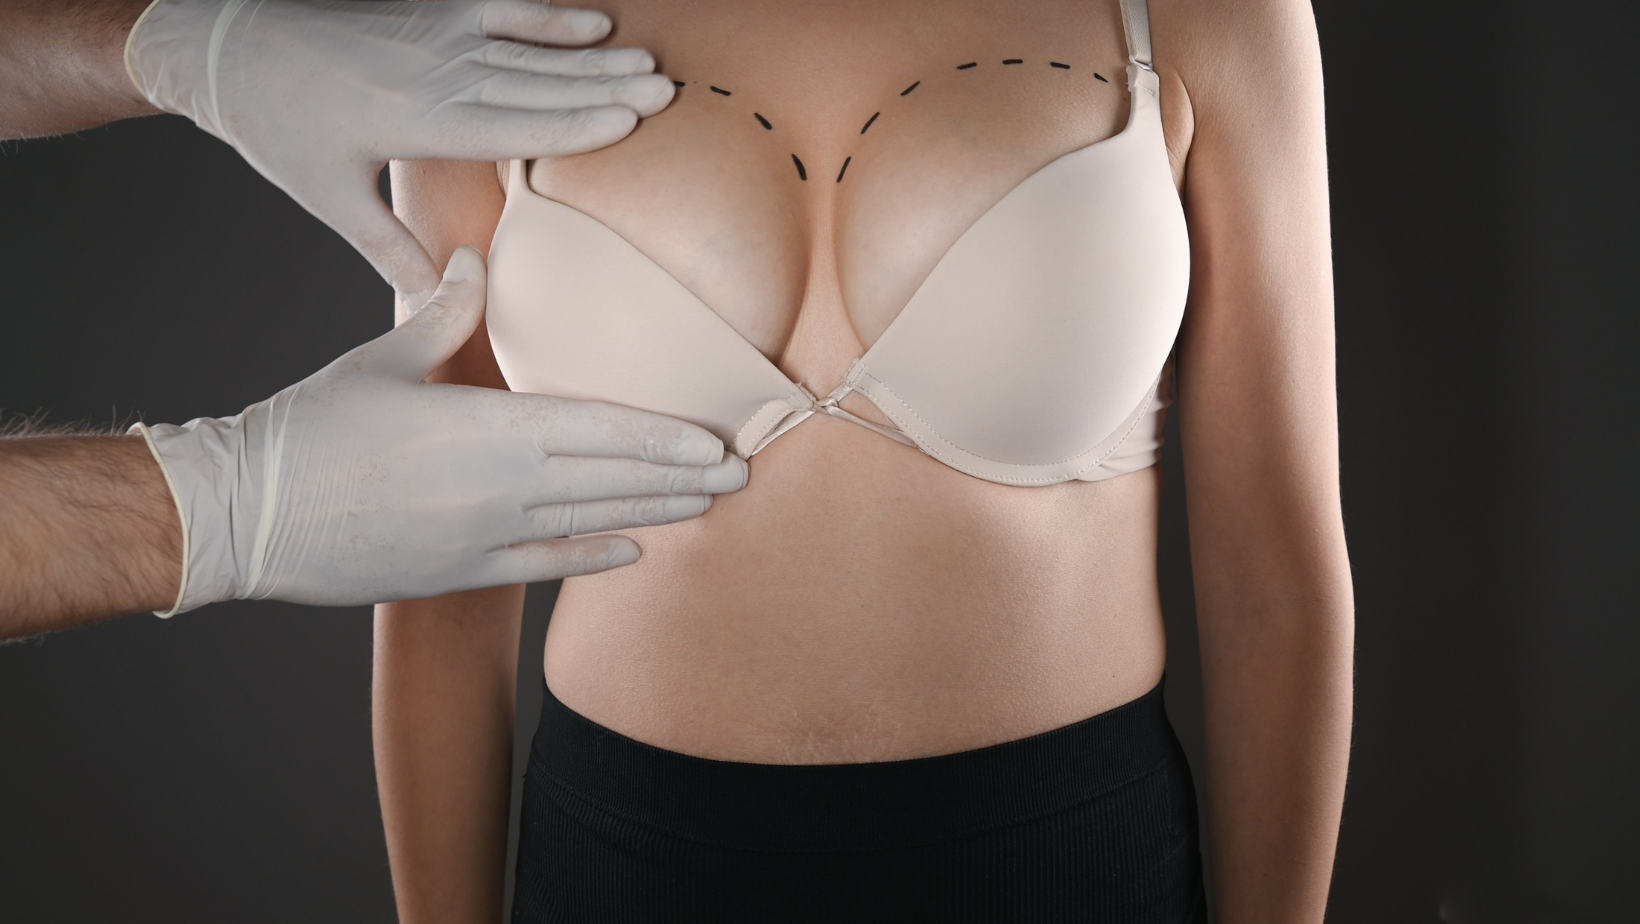 What Can and Can't Be Physically Changed By Breast Augmentation